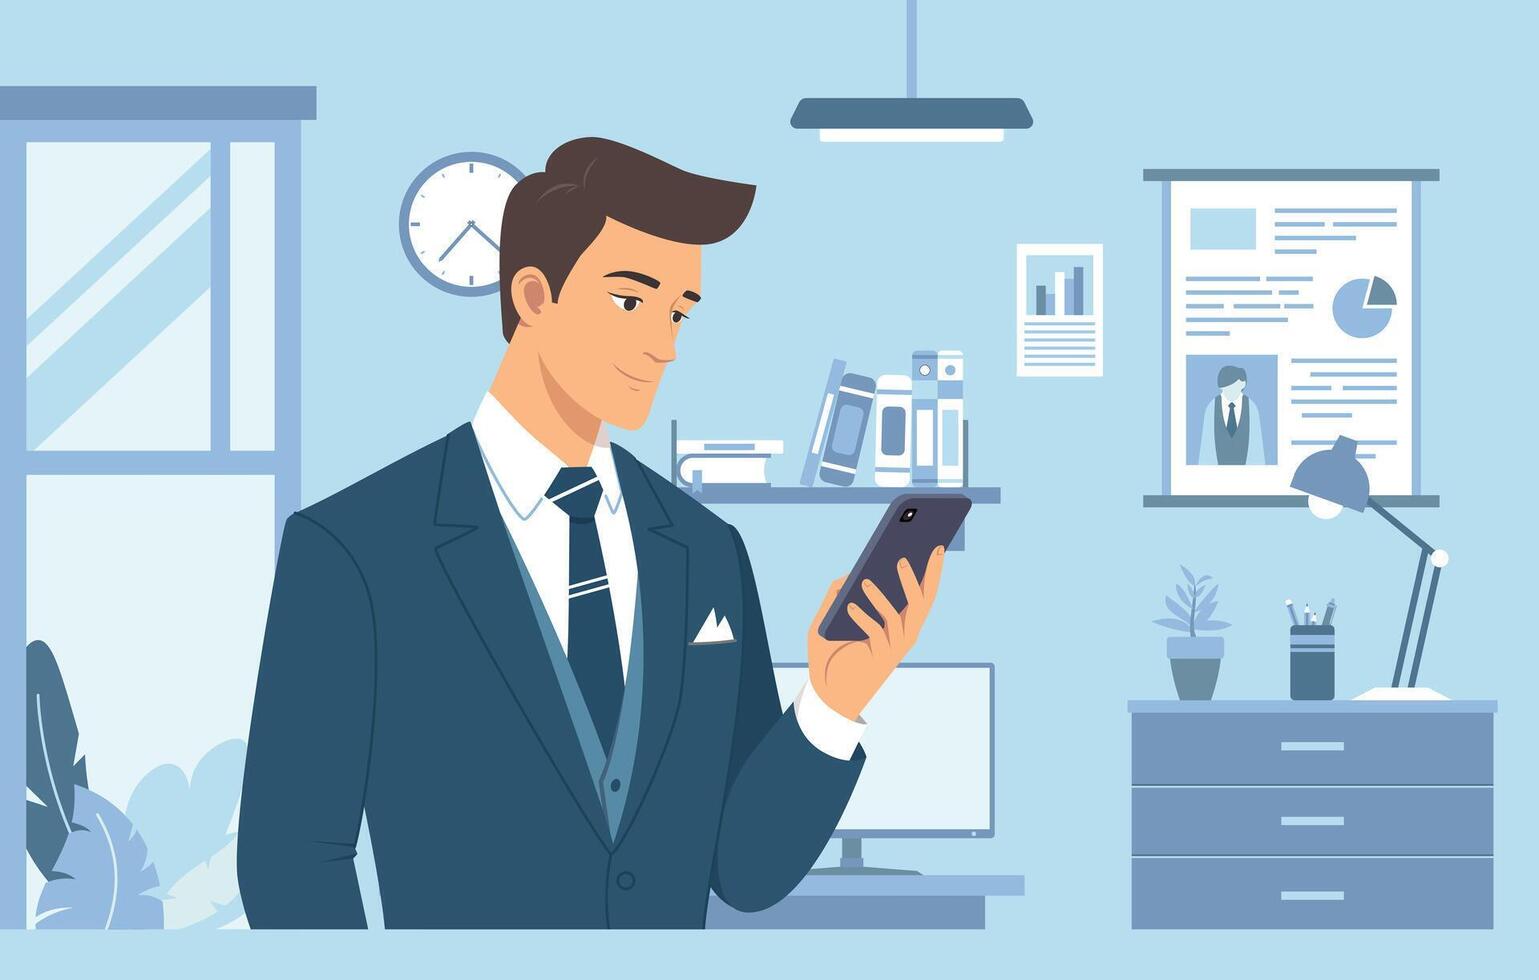 Using a phone illustration. Young business man in suit using his phone in the office vector